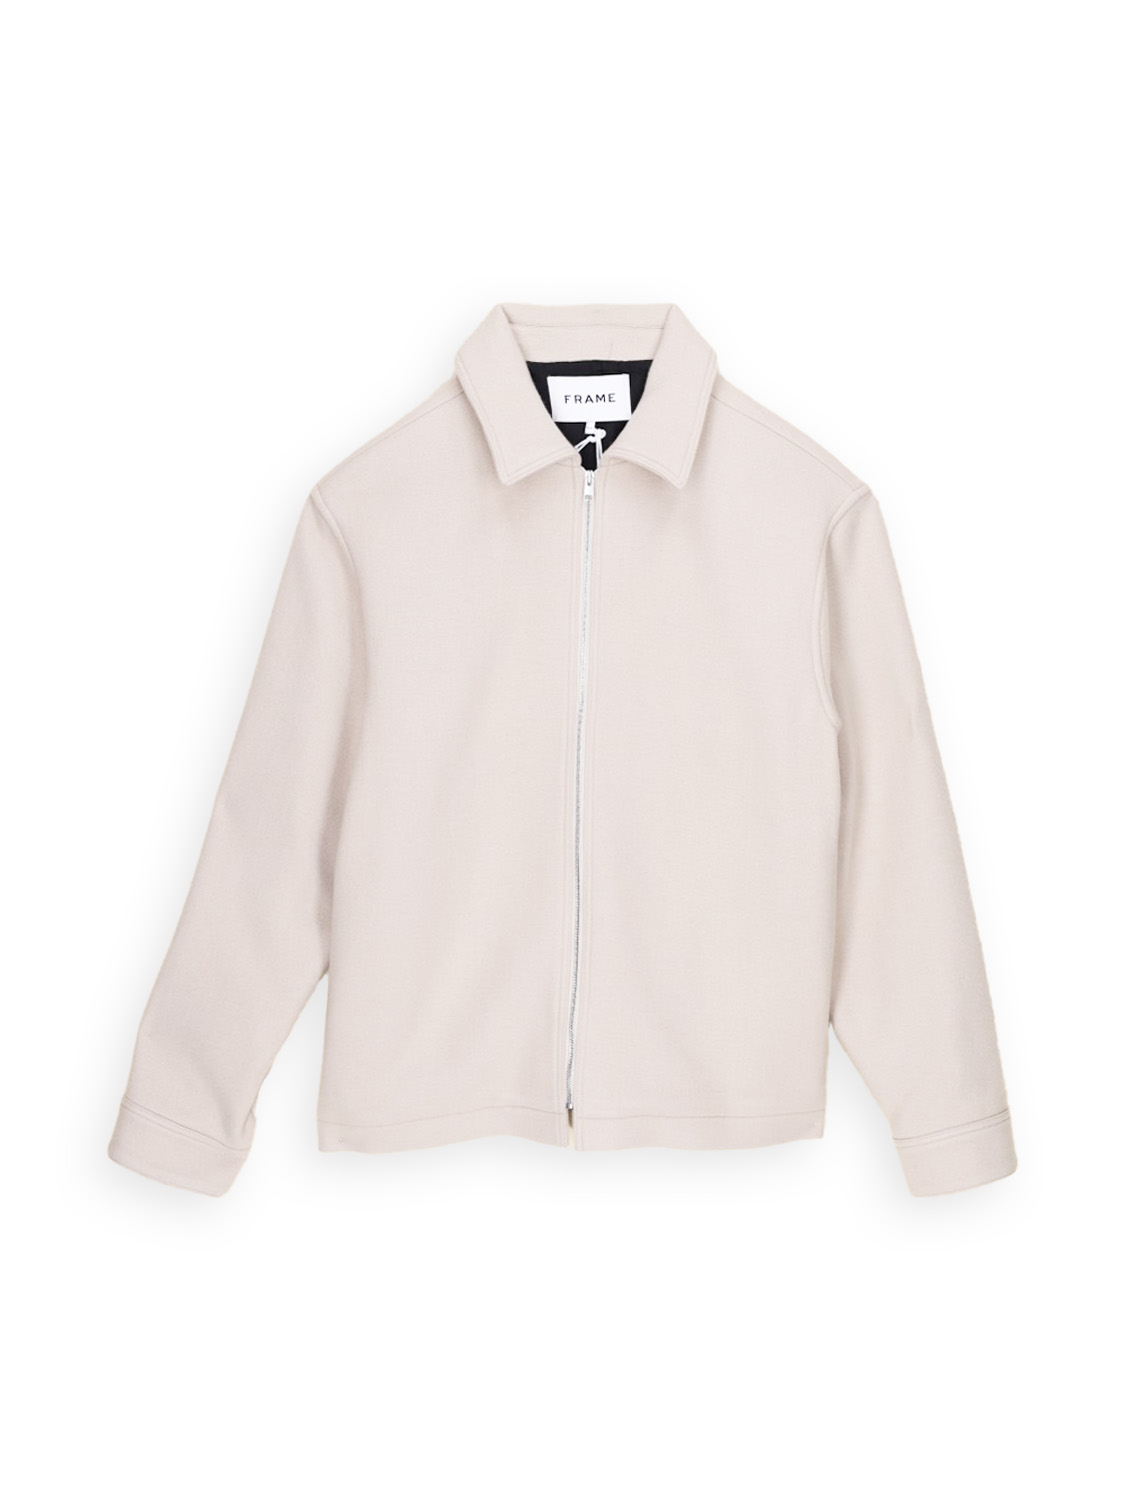 Textured - Overshirt in virgin wool with cashmere 